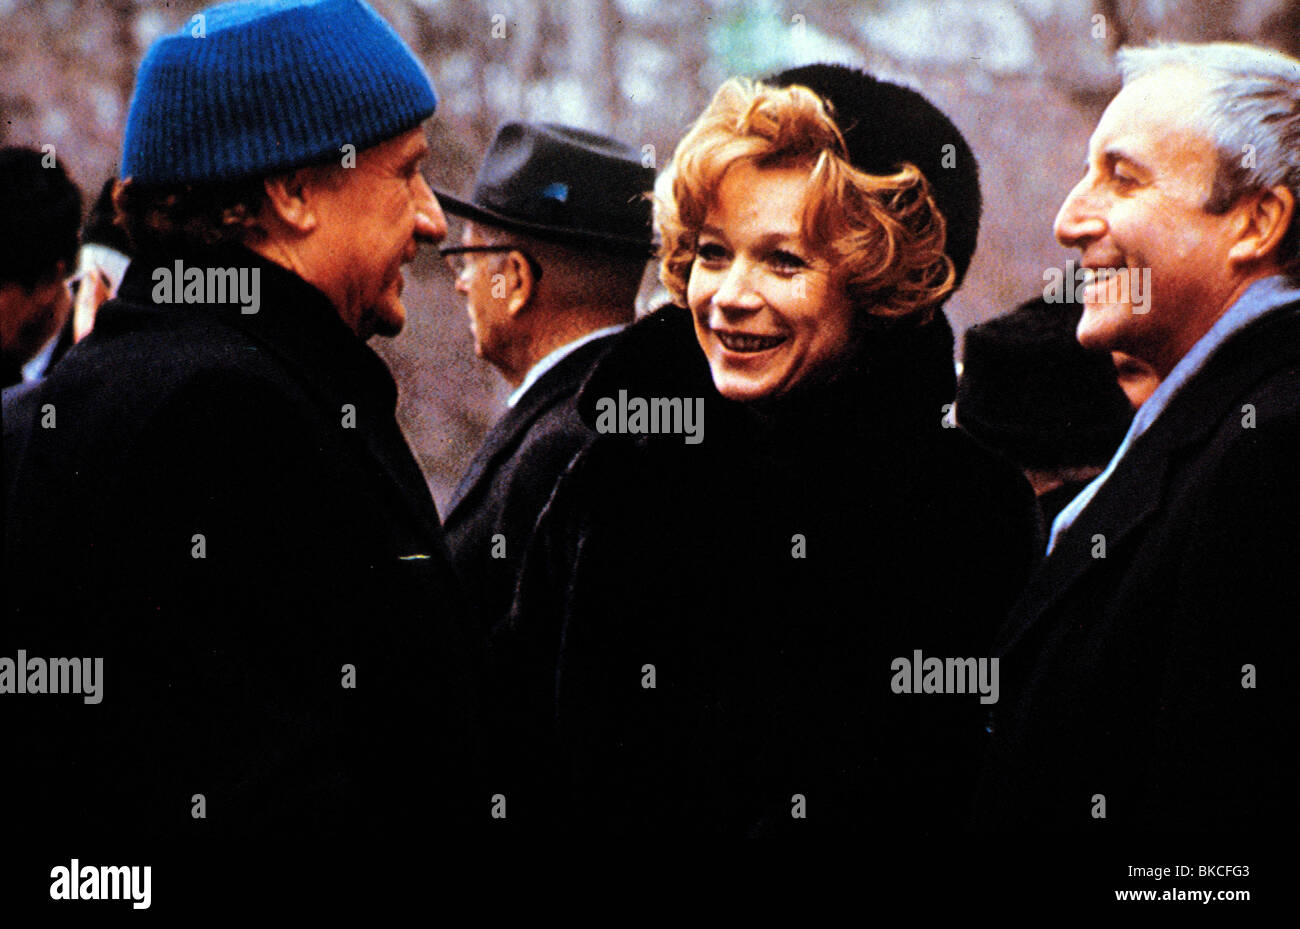 BEING THERE (1979) JACK WARDEN, SHIRLEY MACLAINE, PETER SELLERS BEG 015 Stock Photo